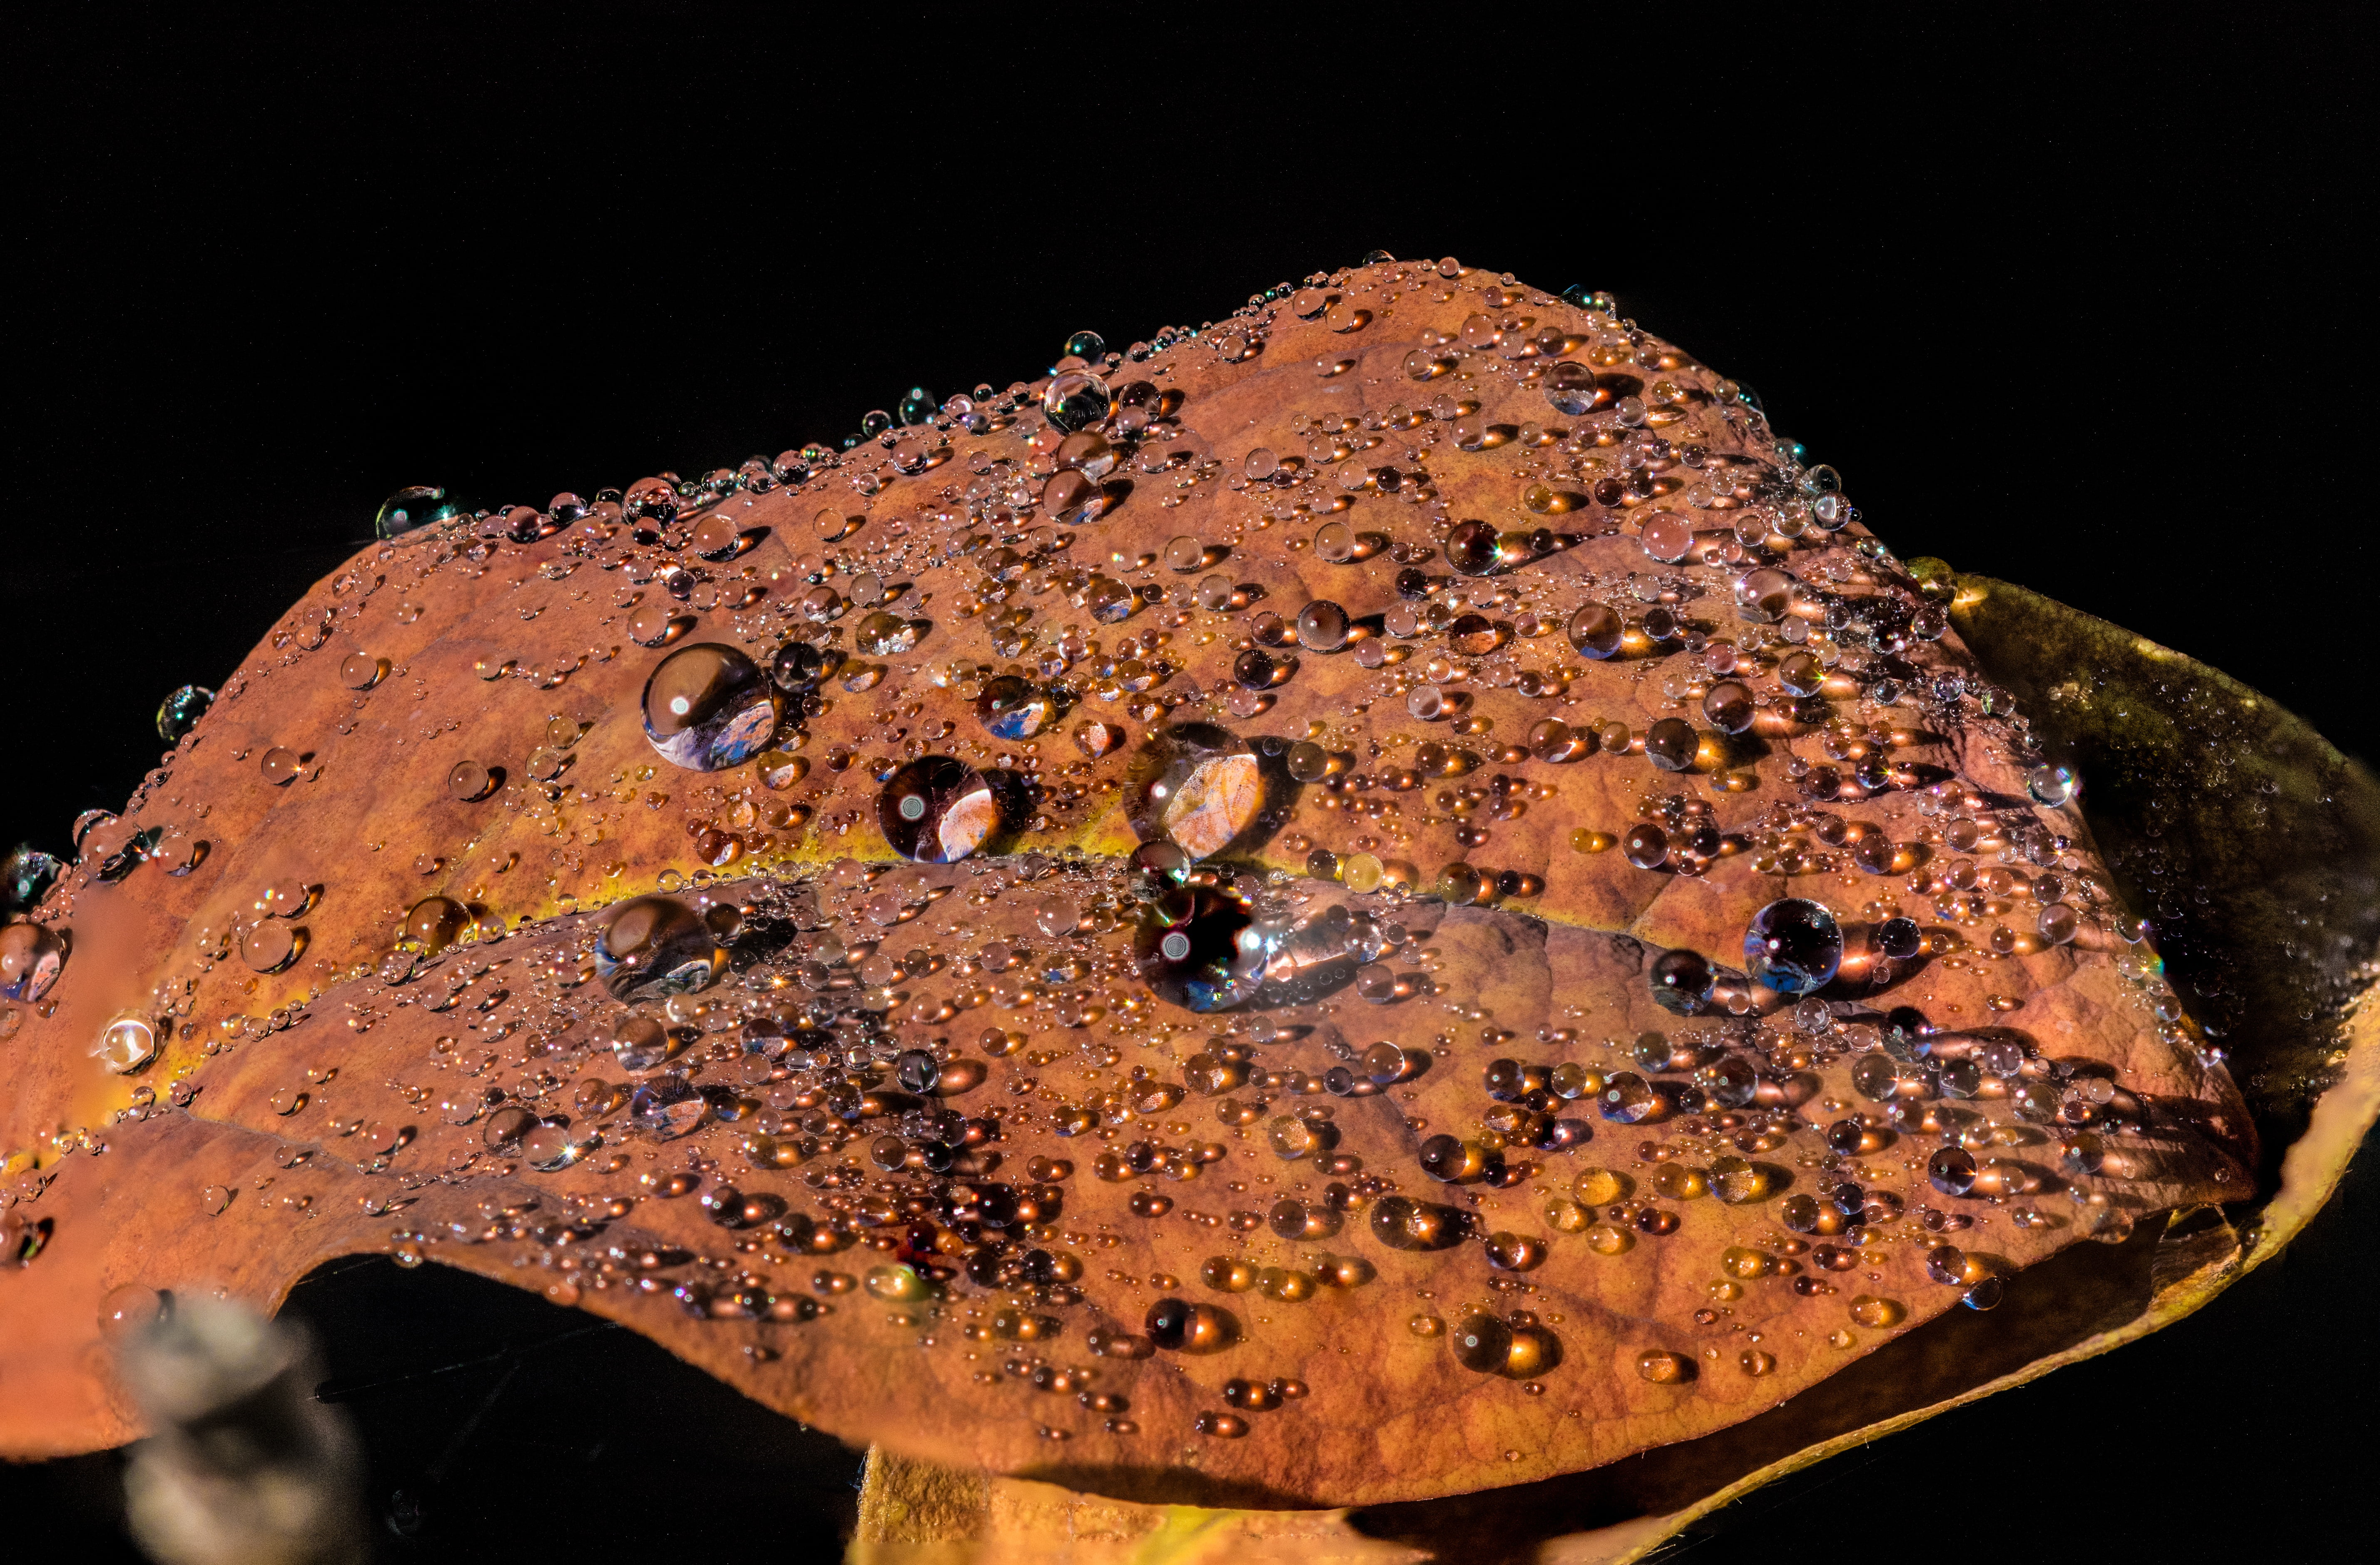 brown leaf with water dew